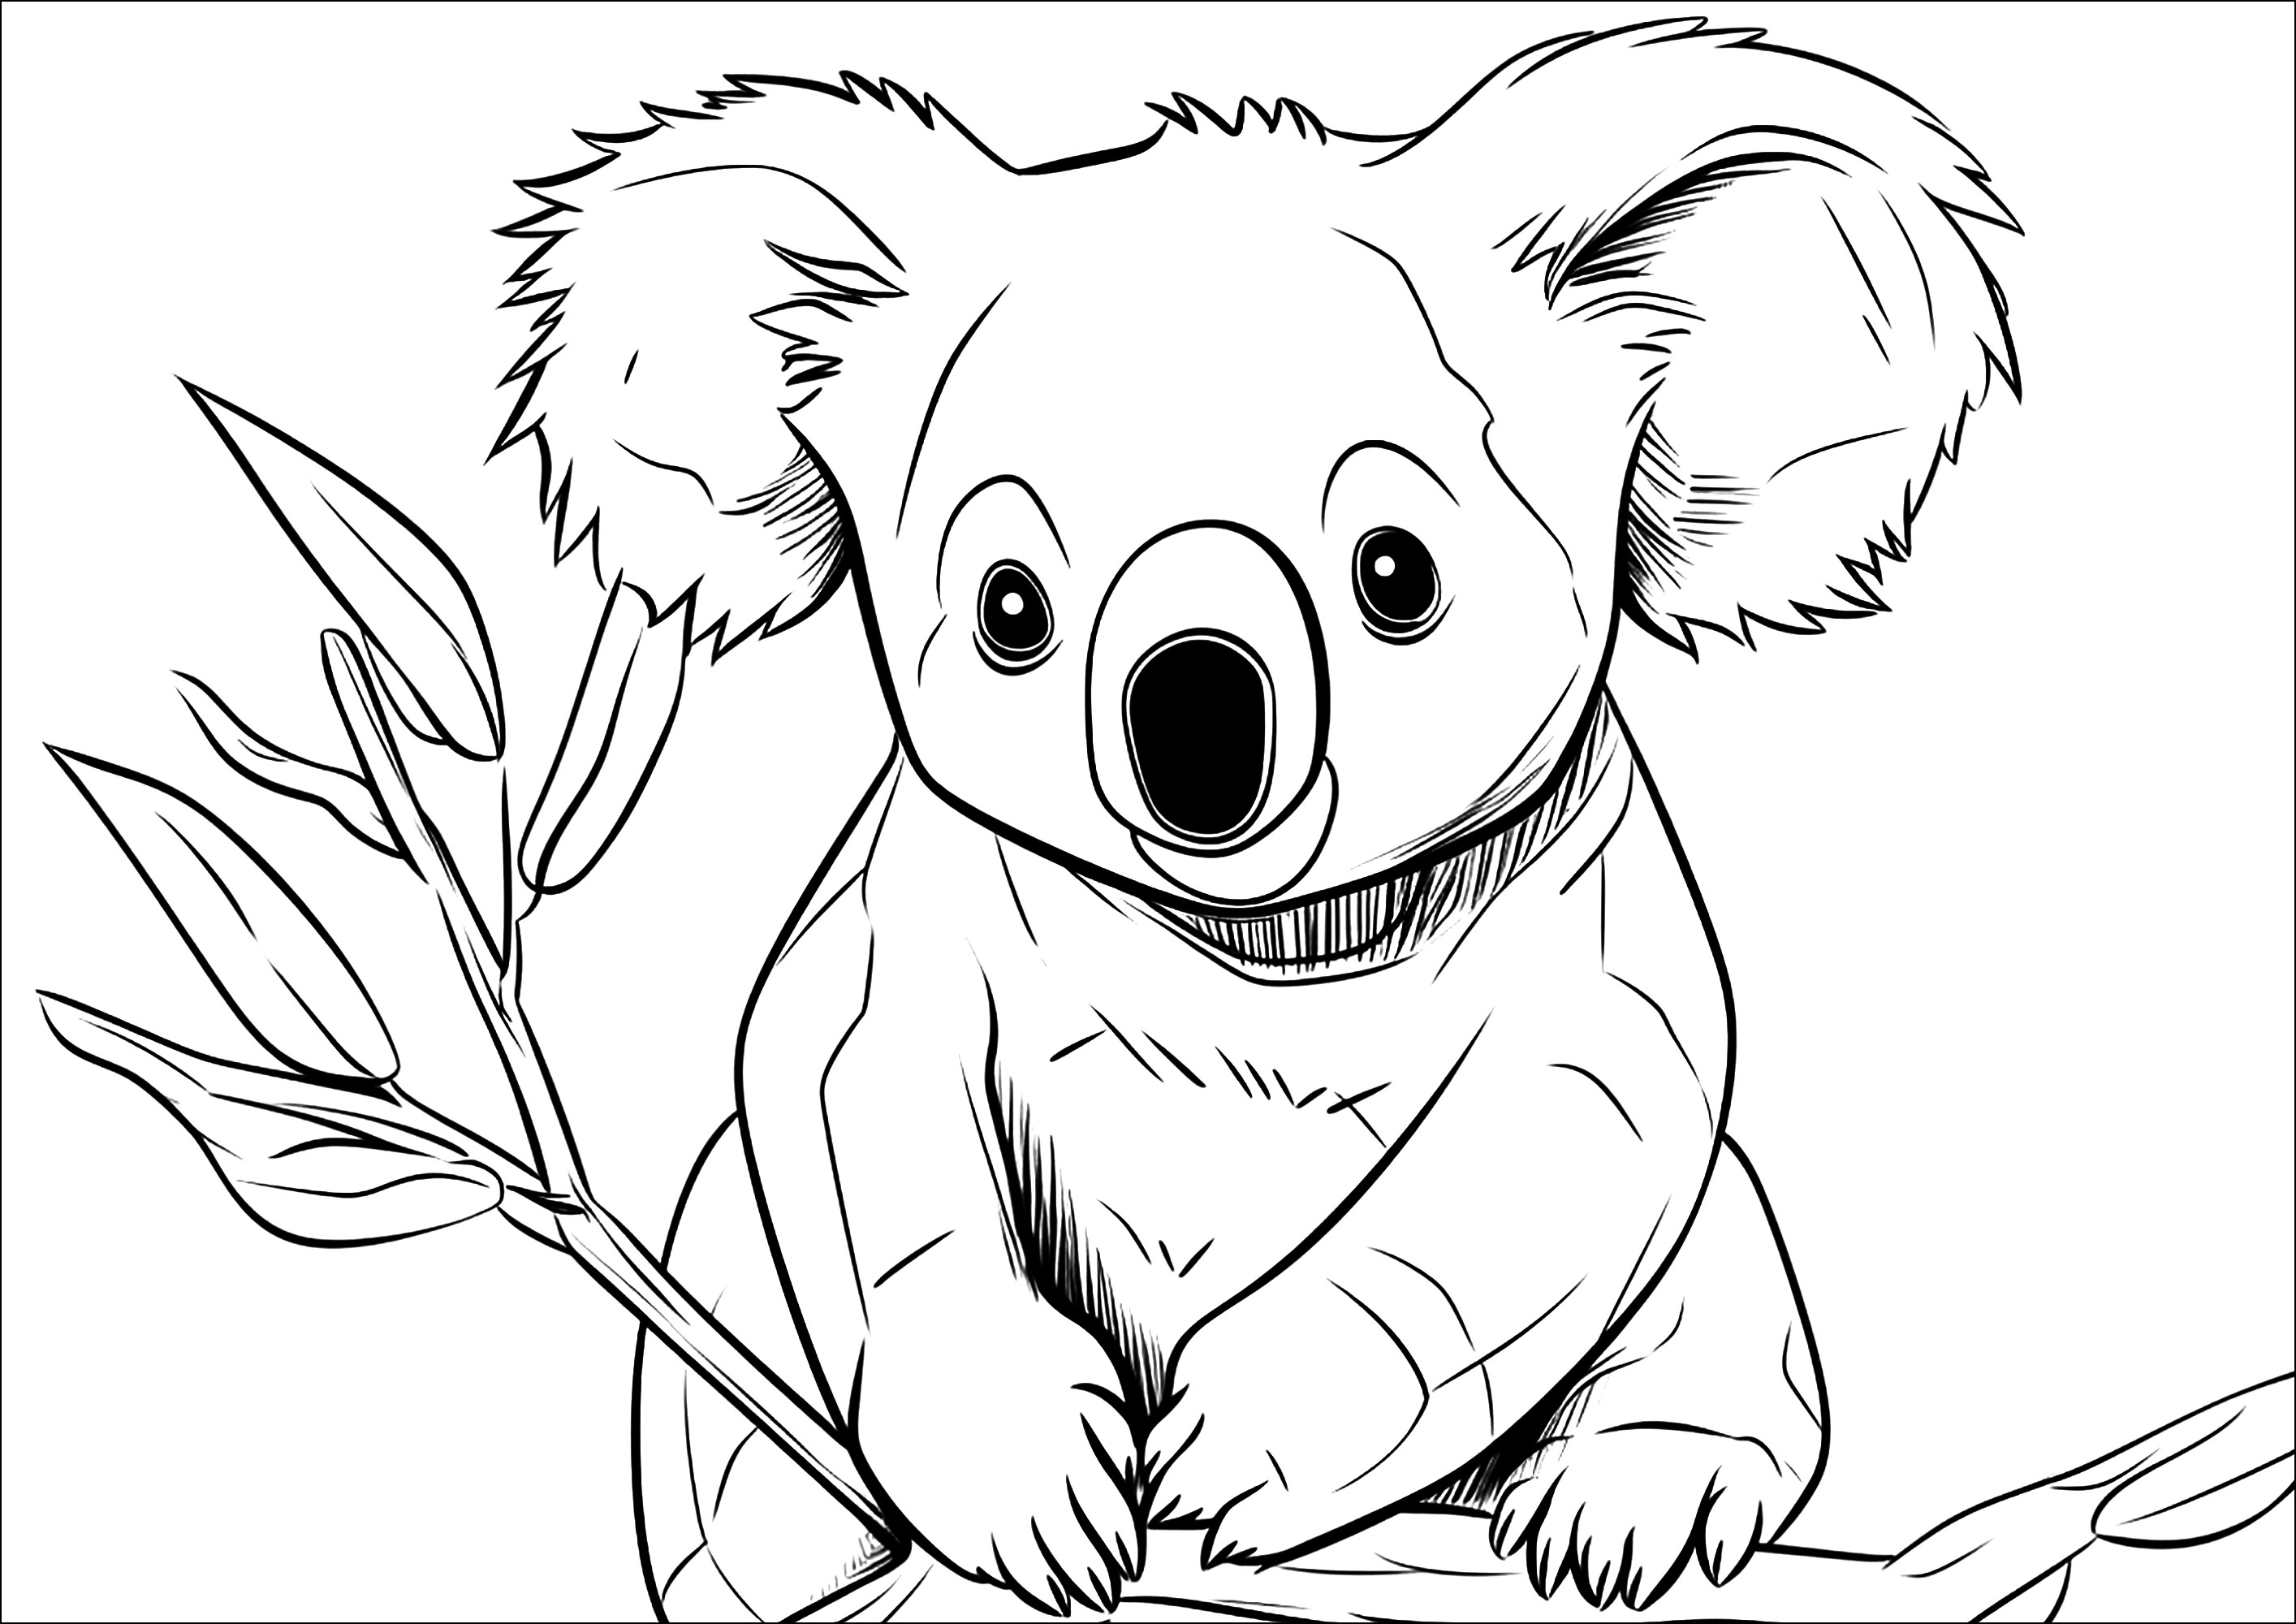 Simple Koalas coloring page to download for free